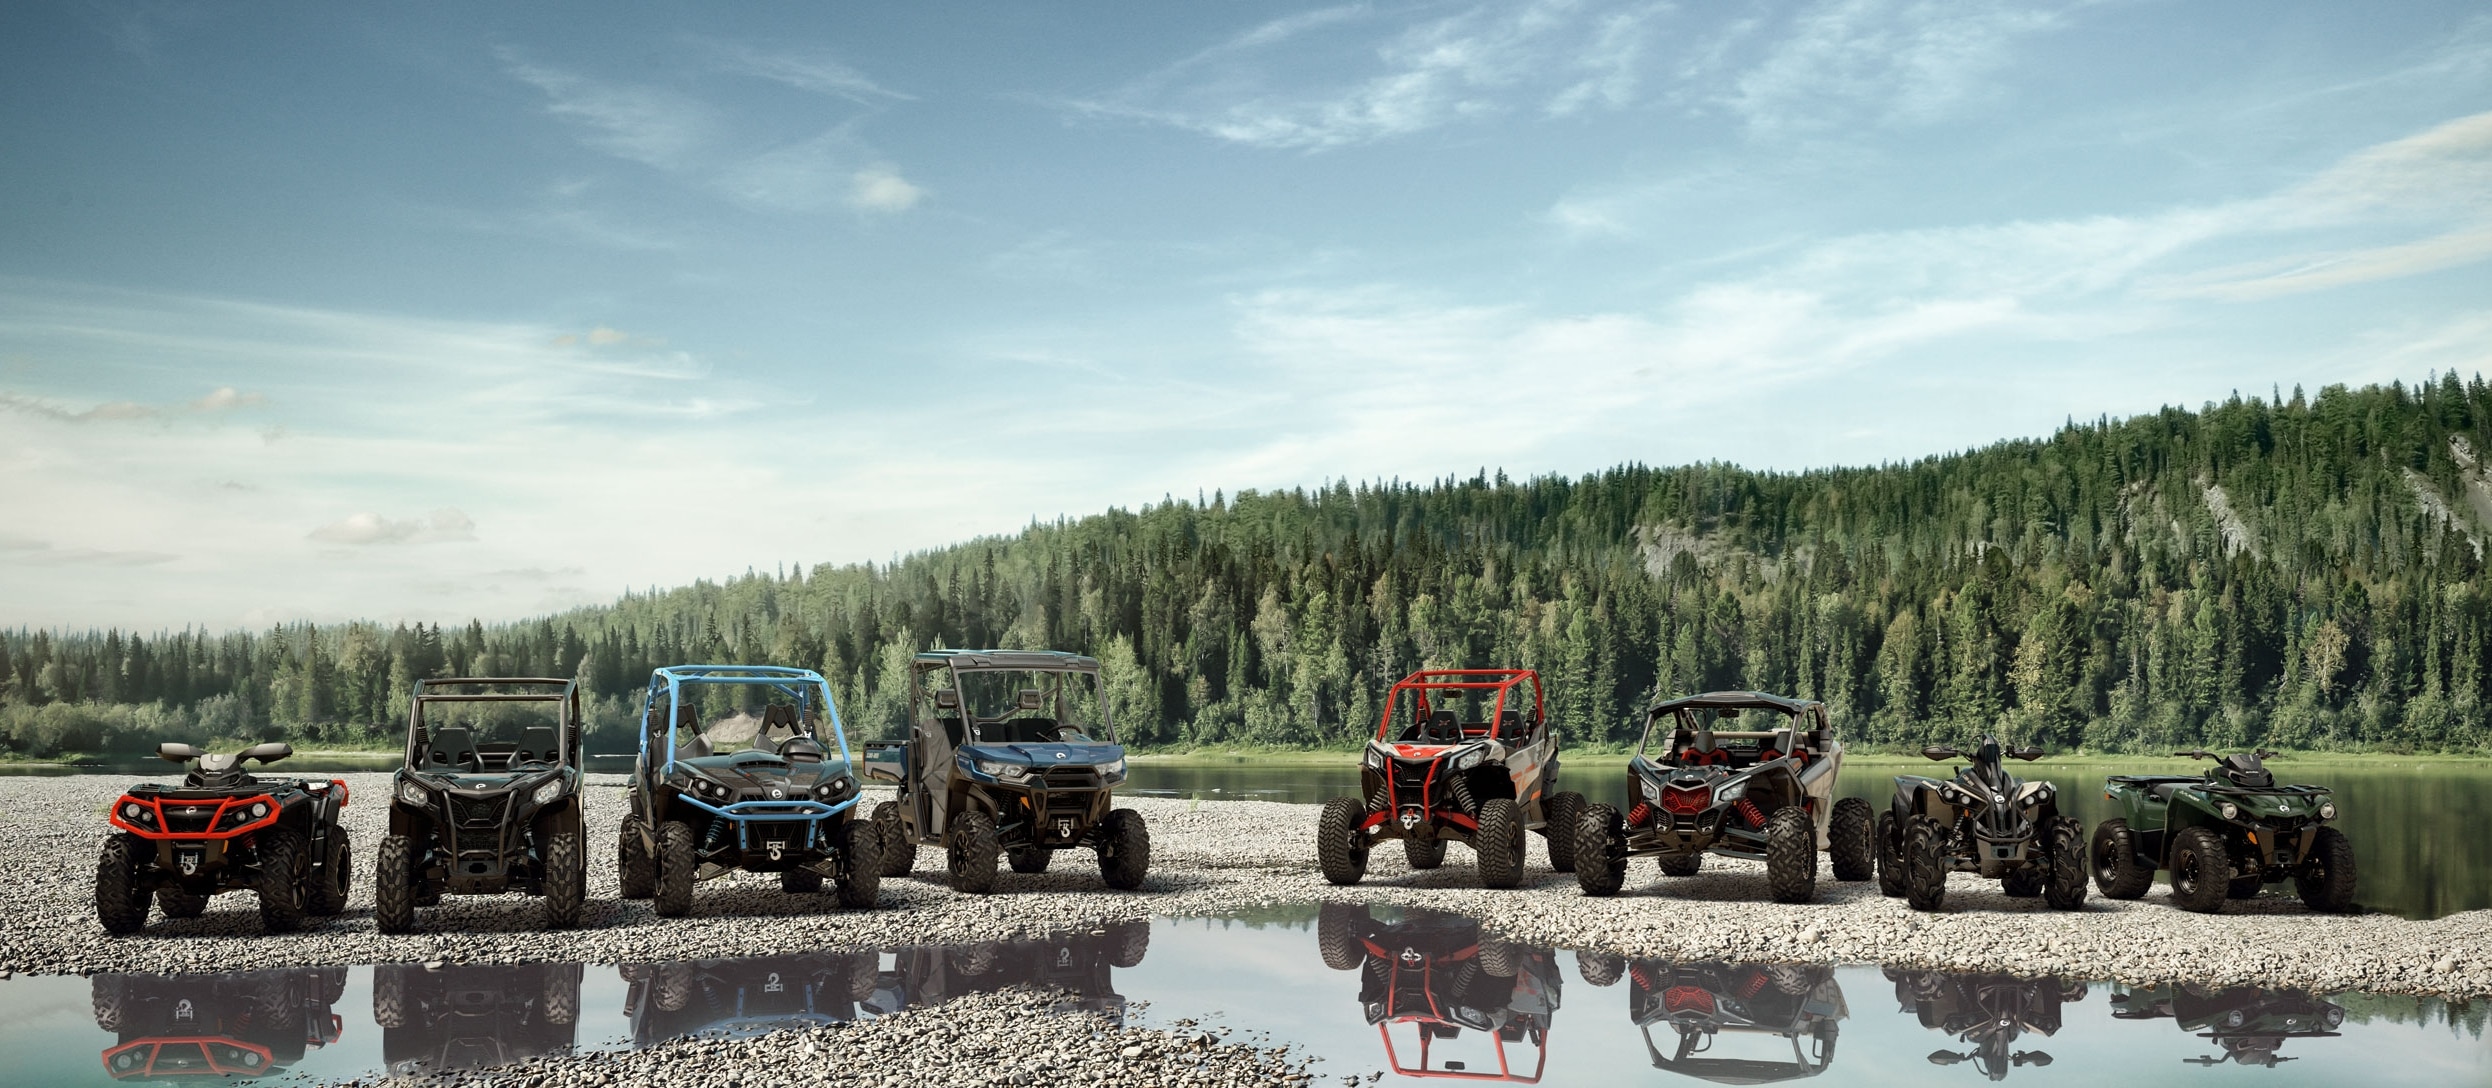 2021 Can-Am Off-Road side-by-side and ATV lineup